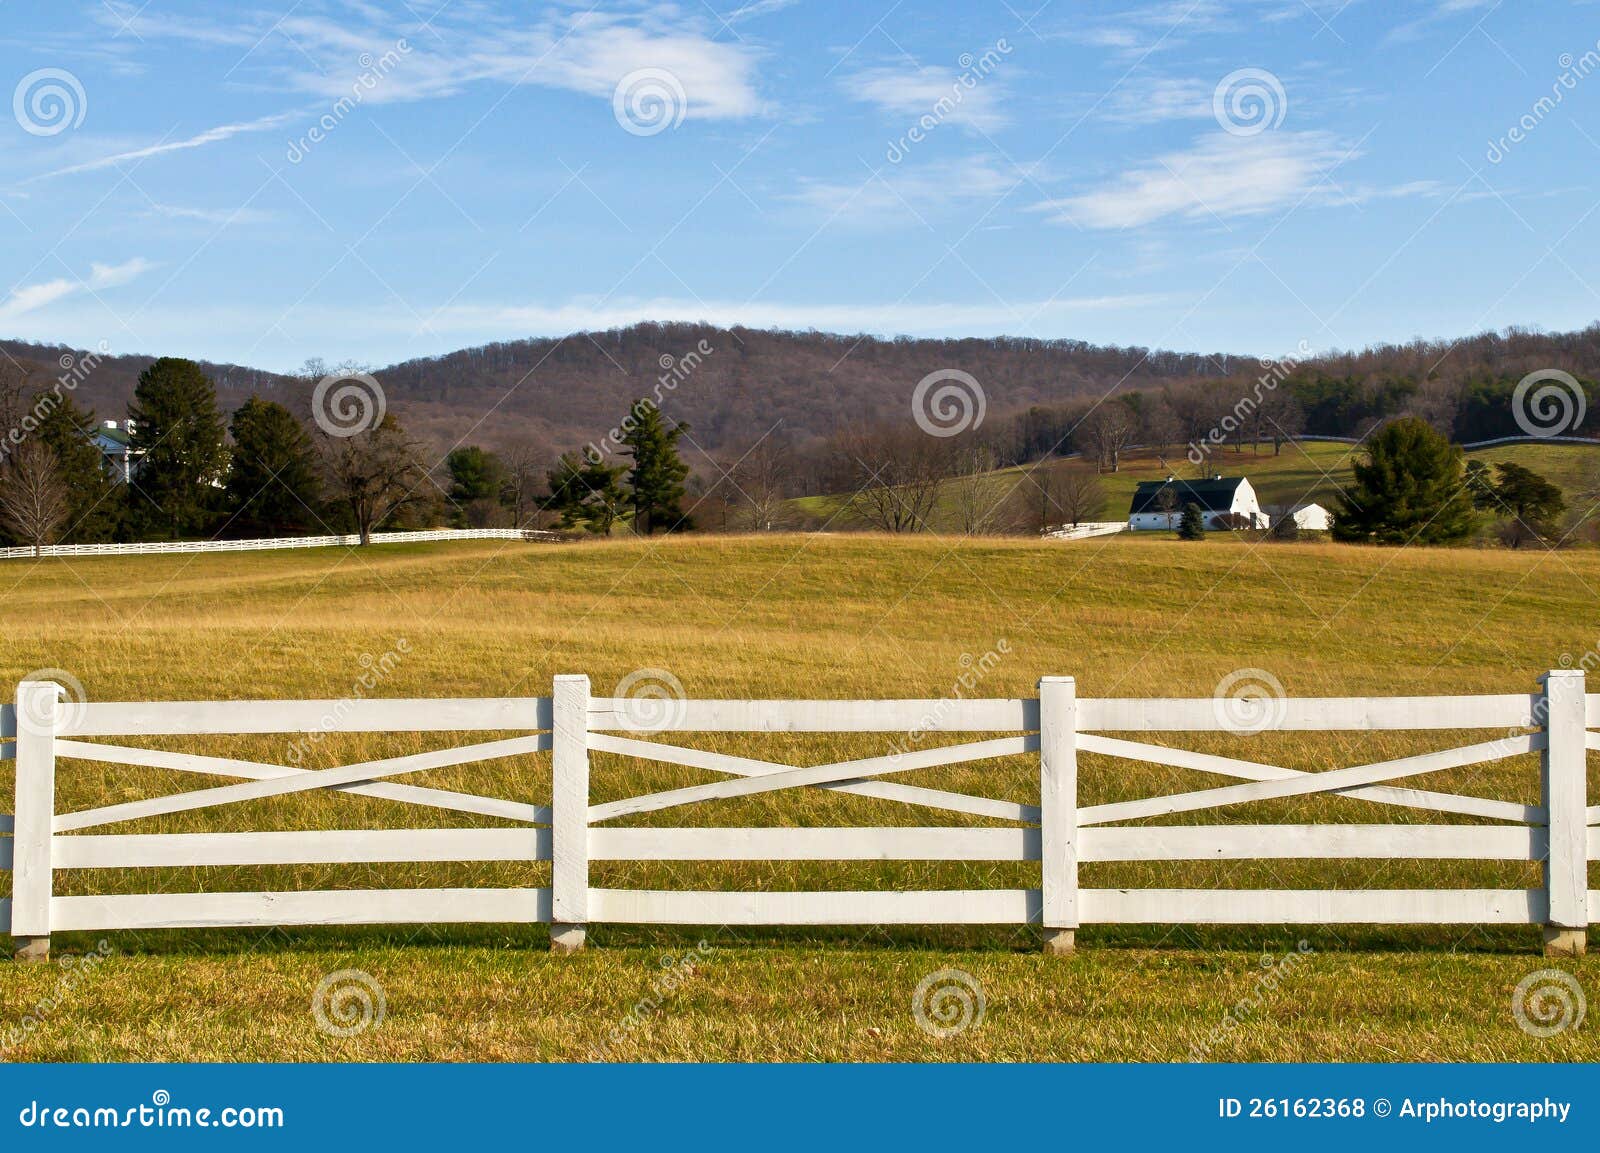 farmland with white fence foreground